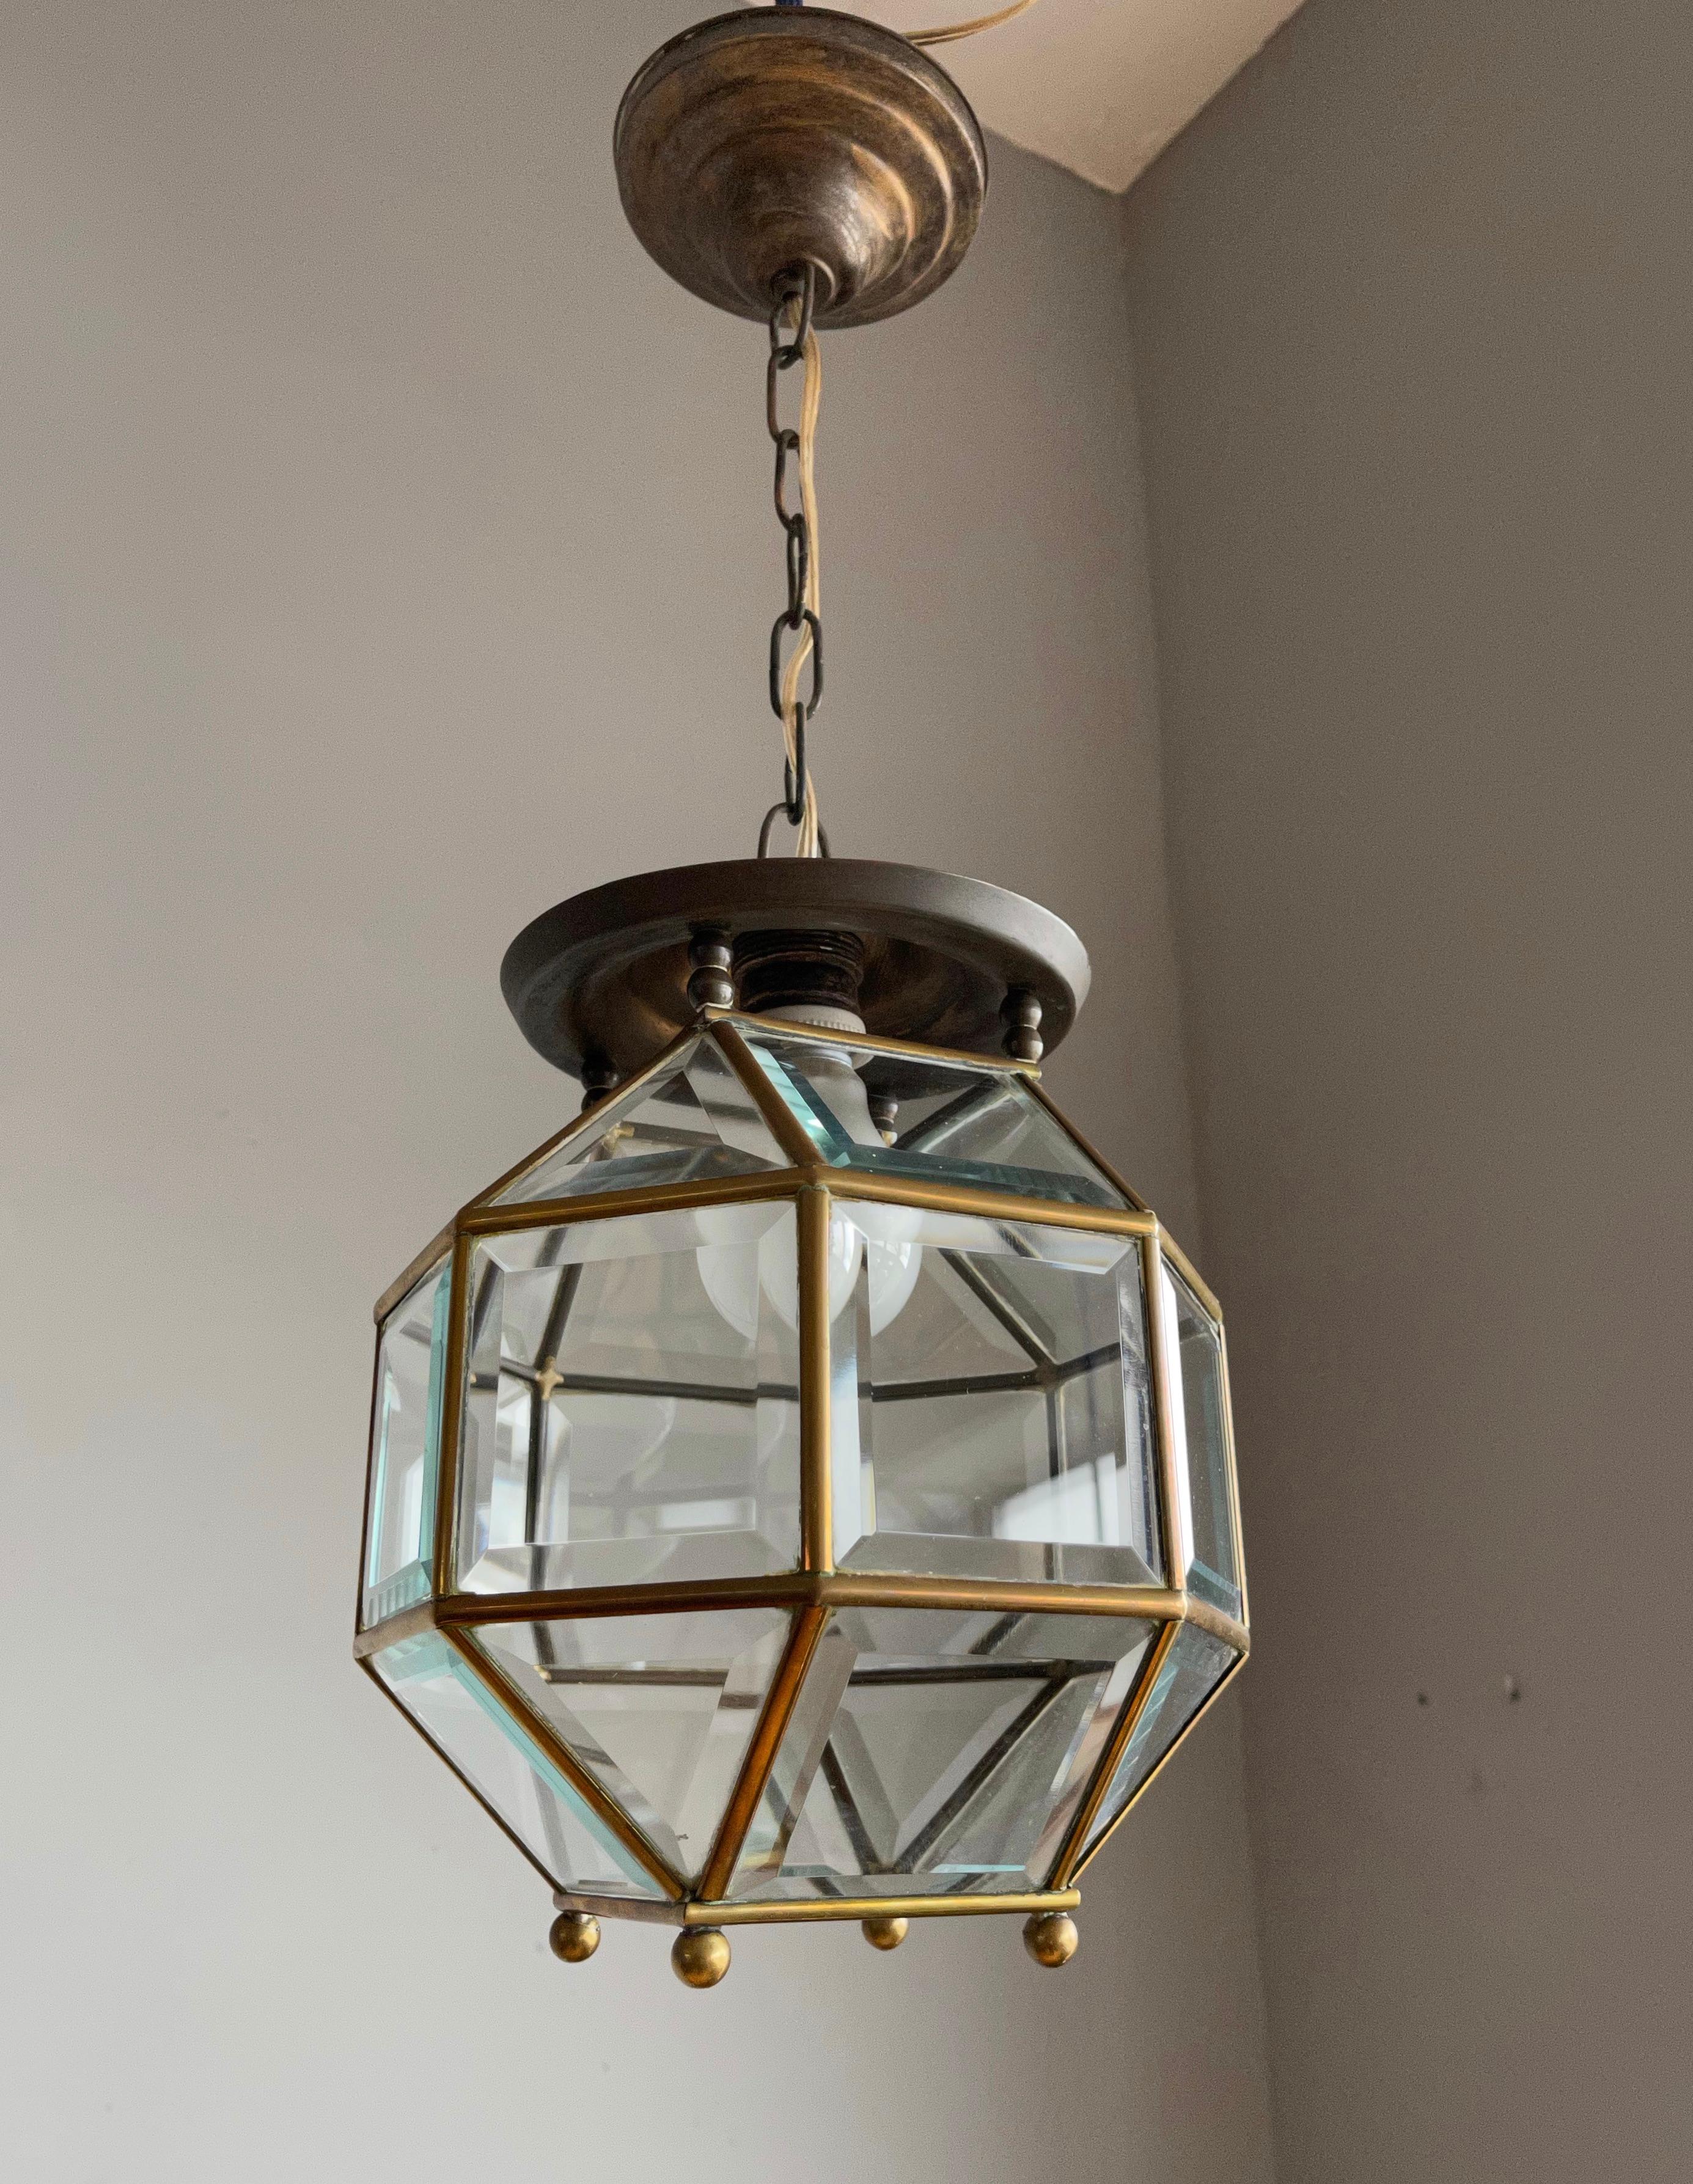 Excellent condition brass and beveled glass lantern.

This stylish design is all handmade and in excellent condition. It has a total of twenty four rectangular, beveled glass sections framed in brass and together they form a classy and timeless